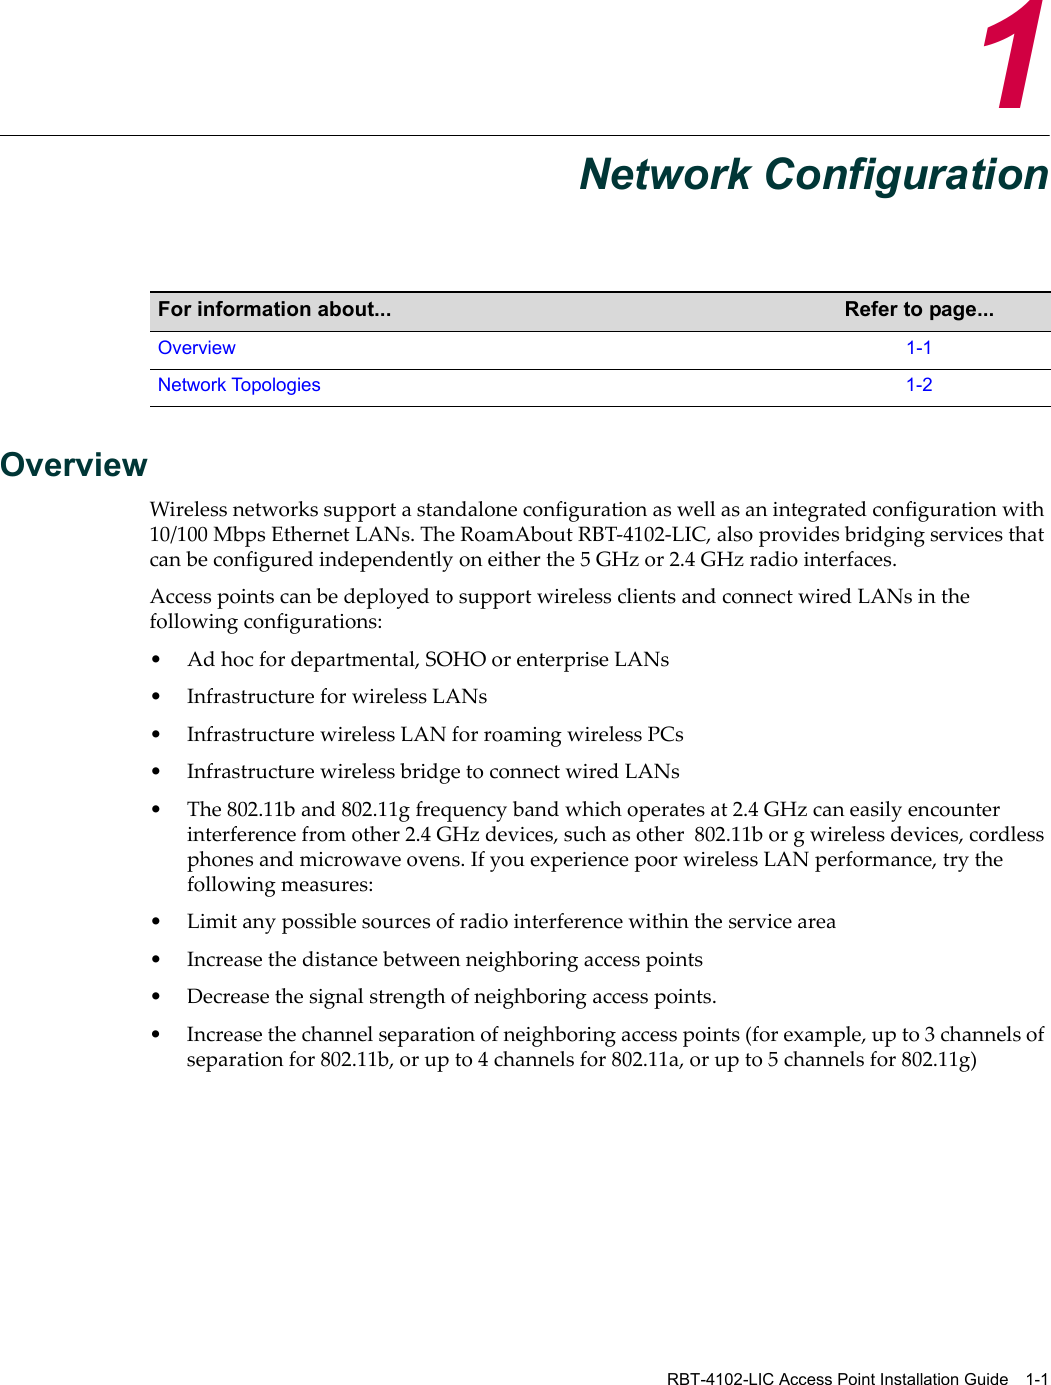 RBT-4102-LIC Access Point Installation Guide 1-11Network ConfigurationOverviewWirelessnetworkssupportastandaloneconfigurationaswellasanintegratedconfigurationwith10/100 MbpsEthernetLANs.TheRoamAboutRBT‐4102‐LIC,alsoprovidesbridgingservicesthatcanbeconfiguredindependentlyoneitherthe5GHzor2.4GHzradiointerfaces.AccesspointscanbedeployedtosupportwirelessclientsandconnectwiredLANsinthefollowingconfigurations:•Adhocfordepartmental,SOHOorenterpriseLANs• InfrastructureforwirelessLANs• InfrastructurewirelessLANforroamingwirelessPCs• InfrastructurewirelessbridgetoconnectwiredLANs•The802.11band802.11gfrequencybandwhichoperatesat2.4 GHzcaneasilyencounterinterferencefromother2.4GHzdevices,suchasother802.11borgwirelessdevices,cordlessphonesandmicrowaveovens.IfyouexperiencepoorwirelessLANperformance,trythefollowingmeasures:•Limitanypossiblesourcesofradiointerferencewithintheservicearea•Increasethedistancebetweenneighboringaccesspoints• Decreasethesignalstrengthofneighboringaccesspoints.•Increasethechannelseparationofneighboringaccesspoints(forexample,upto3channelsofseparationfor802.11b,orupto4channelsfor802.11a,orupto5channelsfor802.11g)For information about... Refer to page...Overview 1-1Network Topologies 1-2